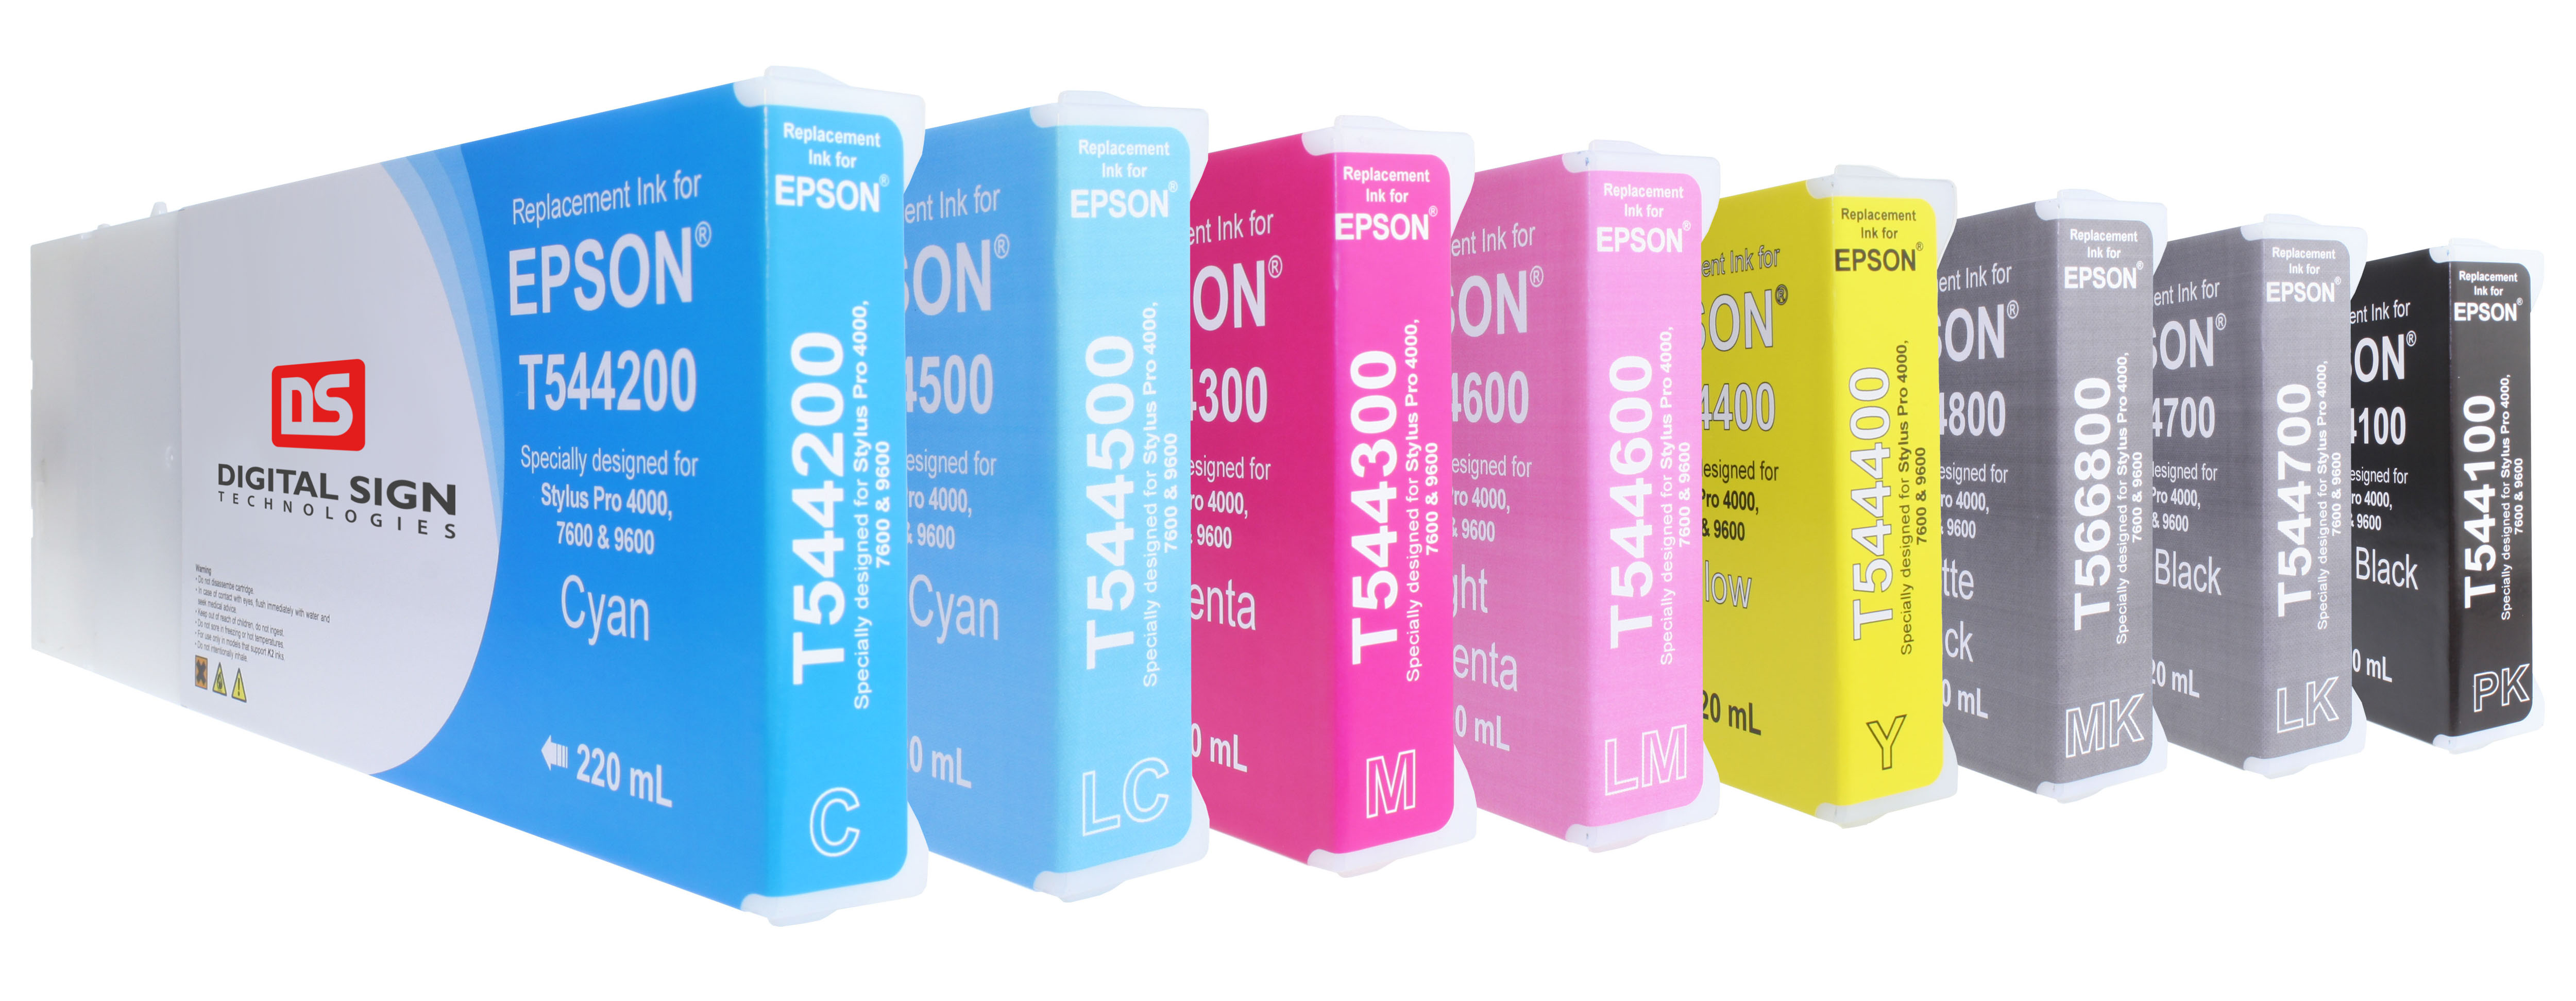 Epson UltraChrome K2 Replacement Ink Cartridges by DST